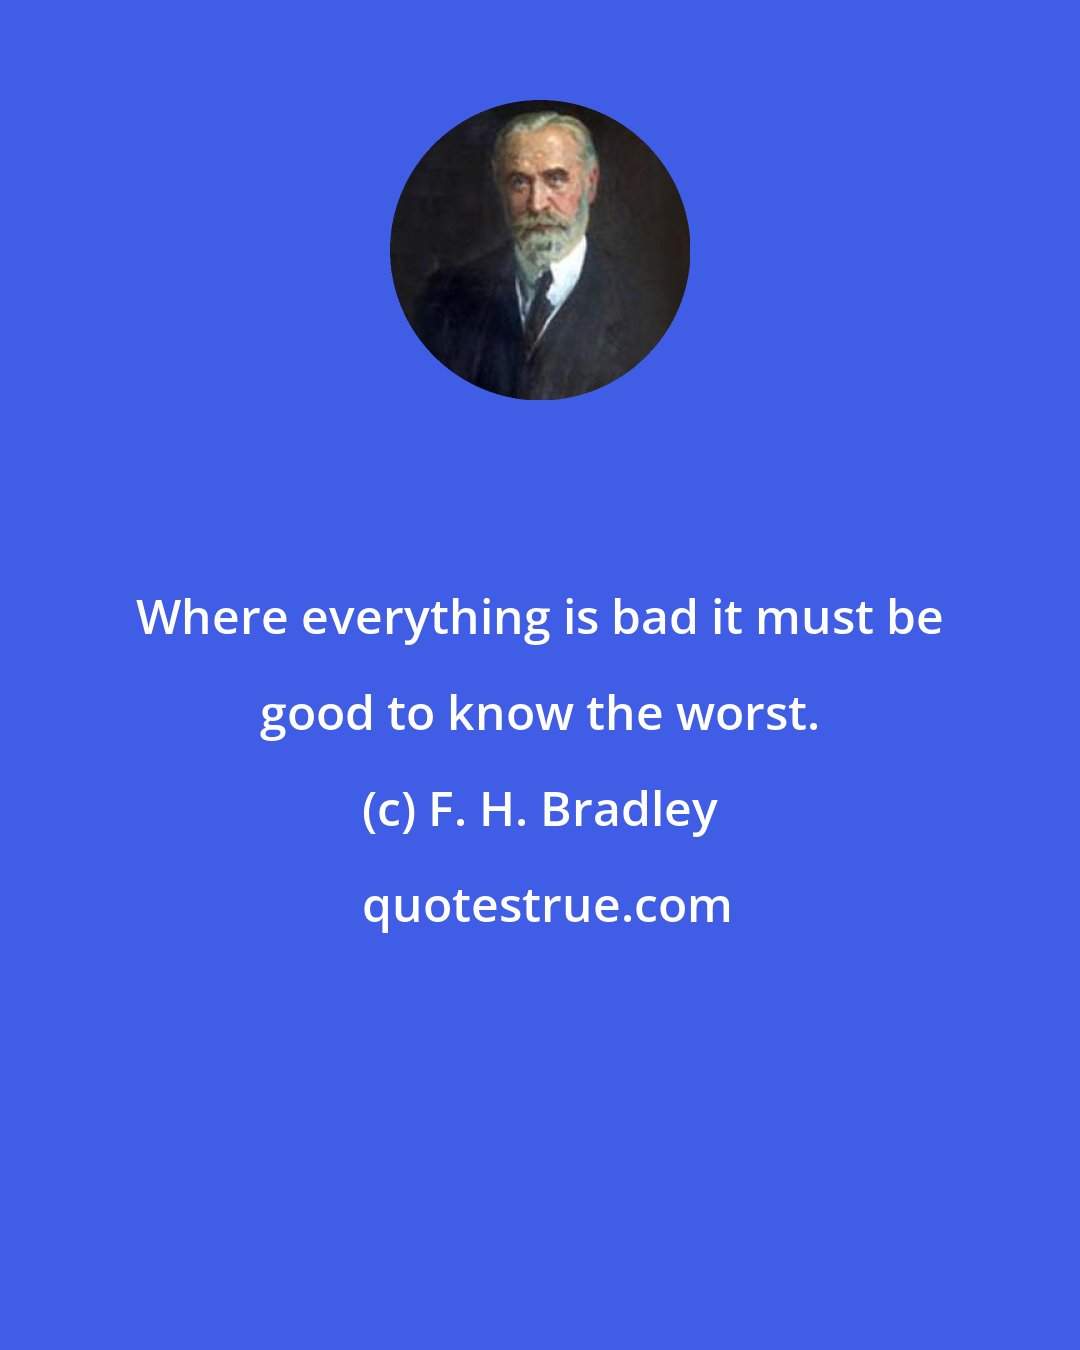 F. H. Bradley: Where everything is bad it must be good to know the worst.